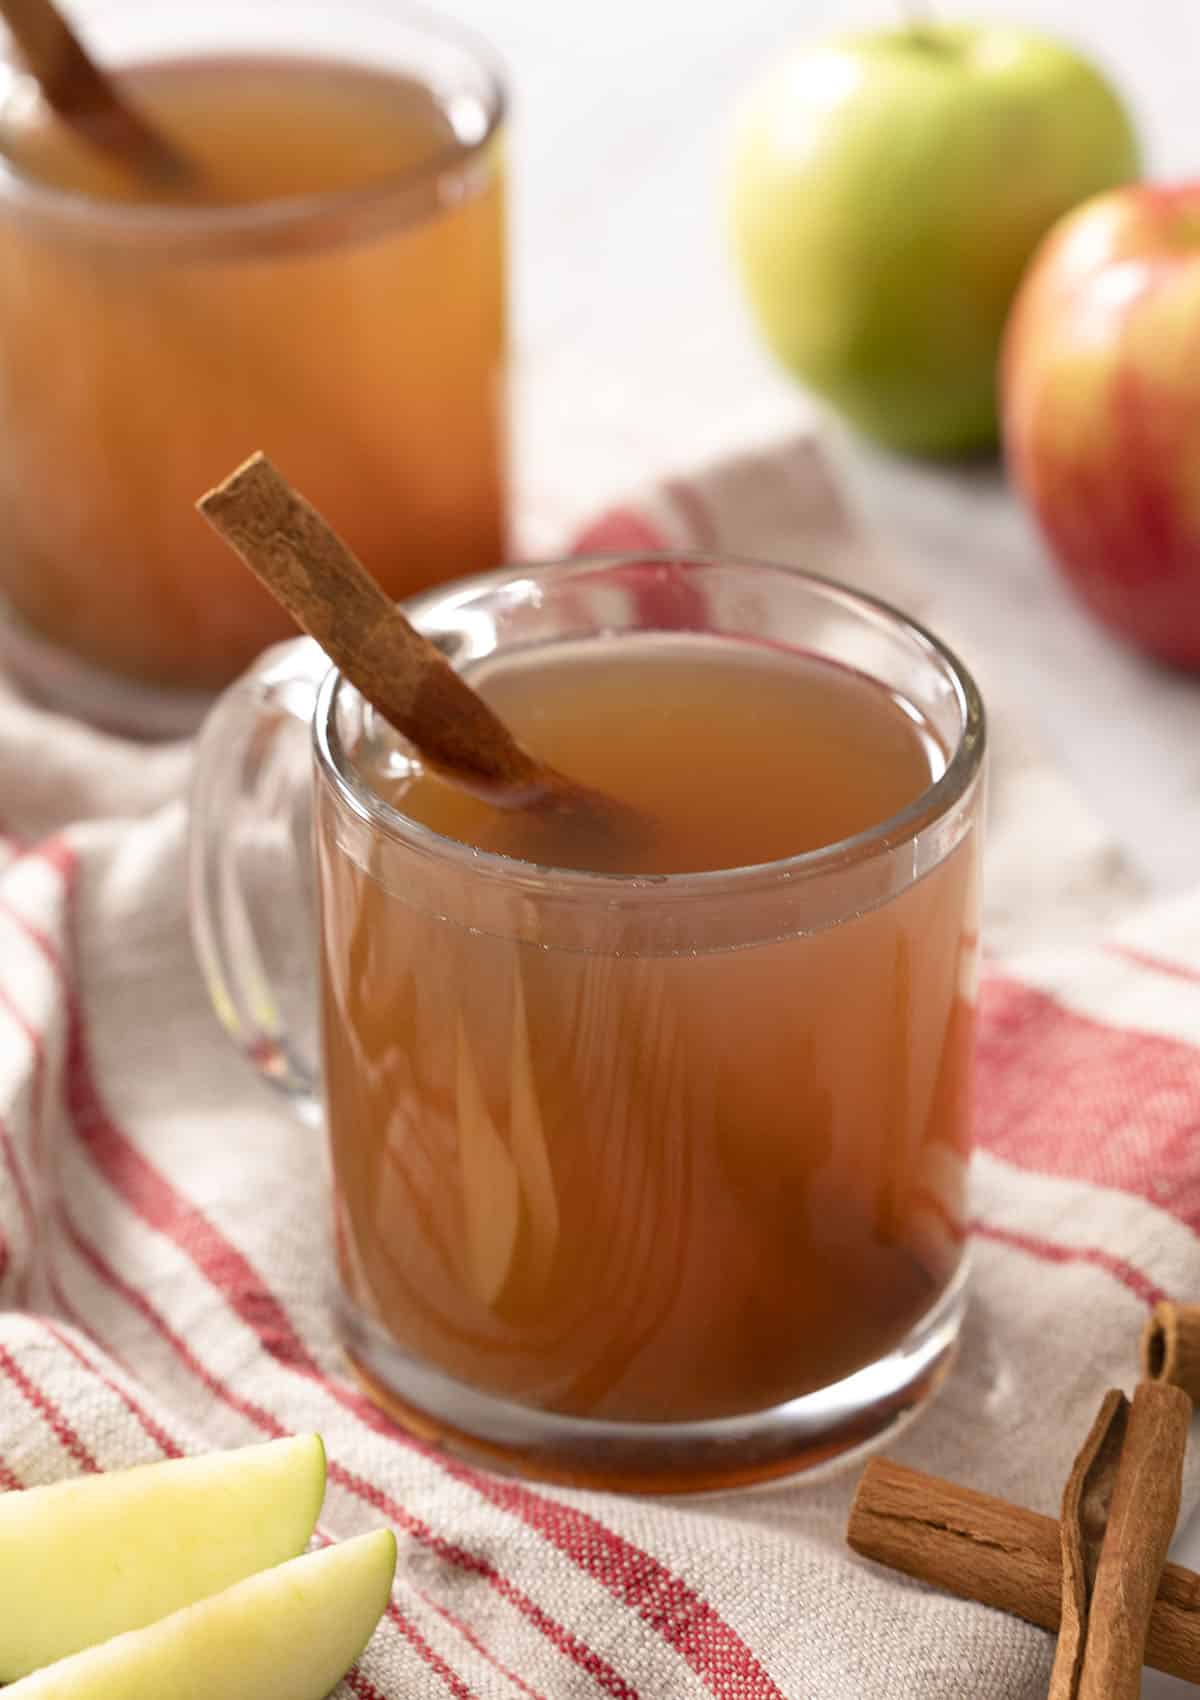 Two glasses of apple cider next to apples and cinnamon sticks.